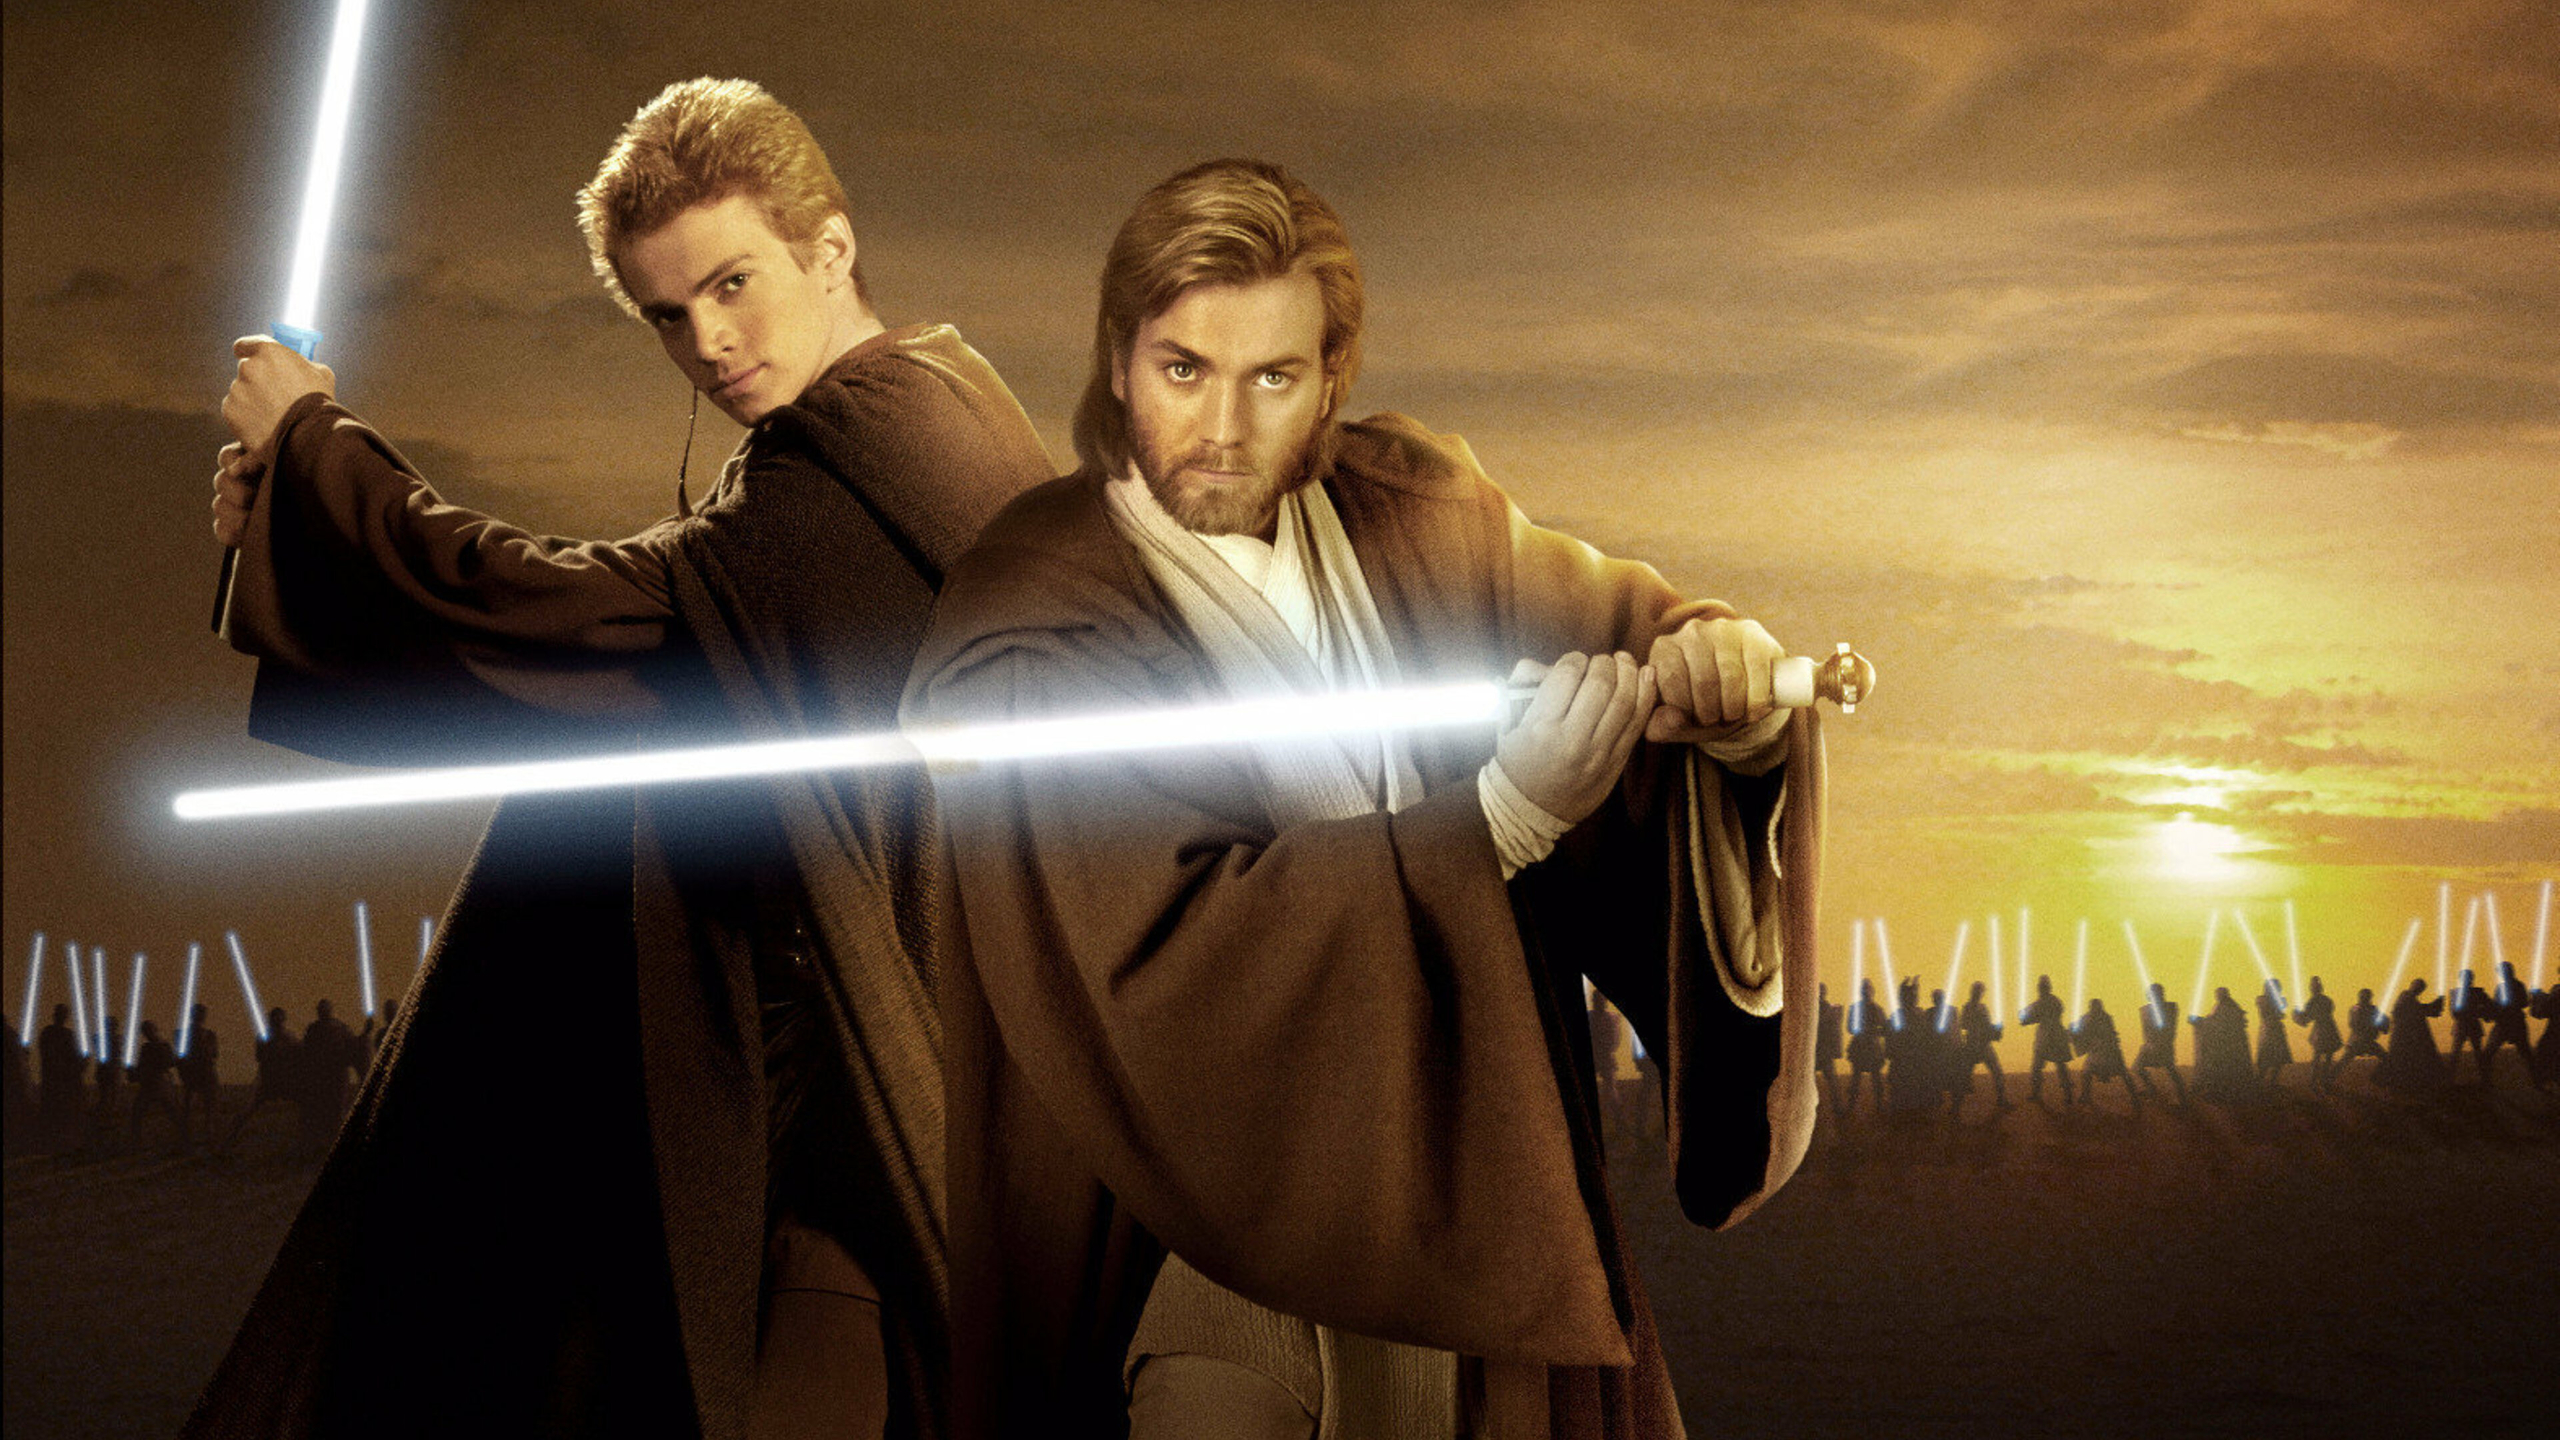 Star Wars Episode II: Attack Of The Clones Wallpapers, Pictures, Images